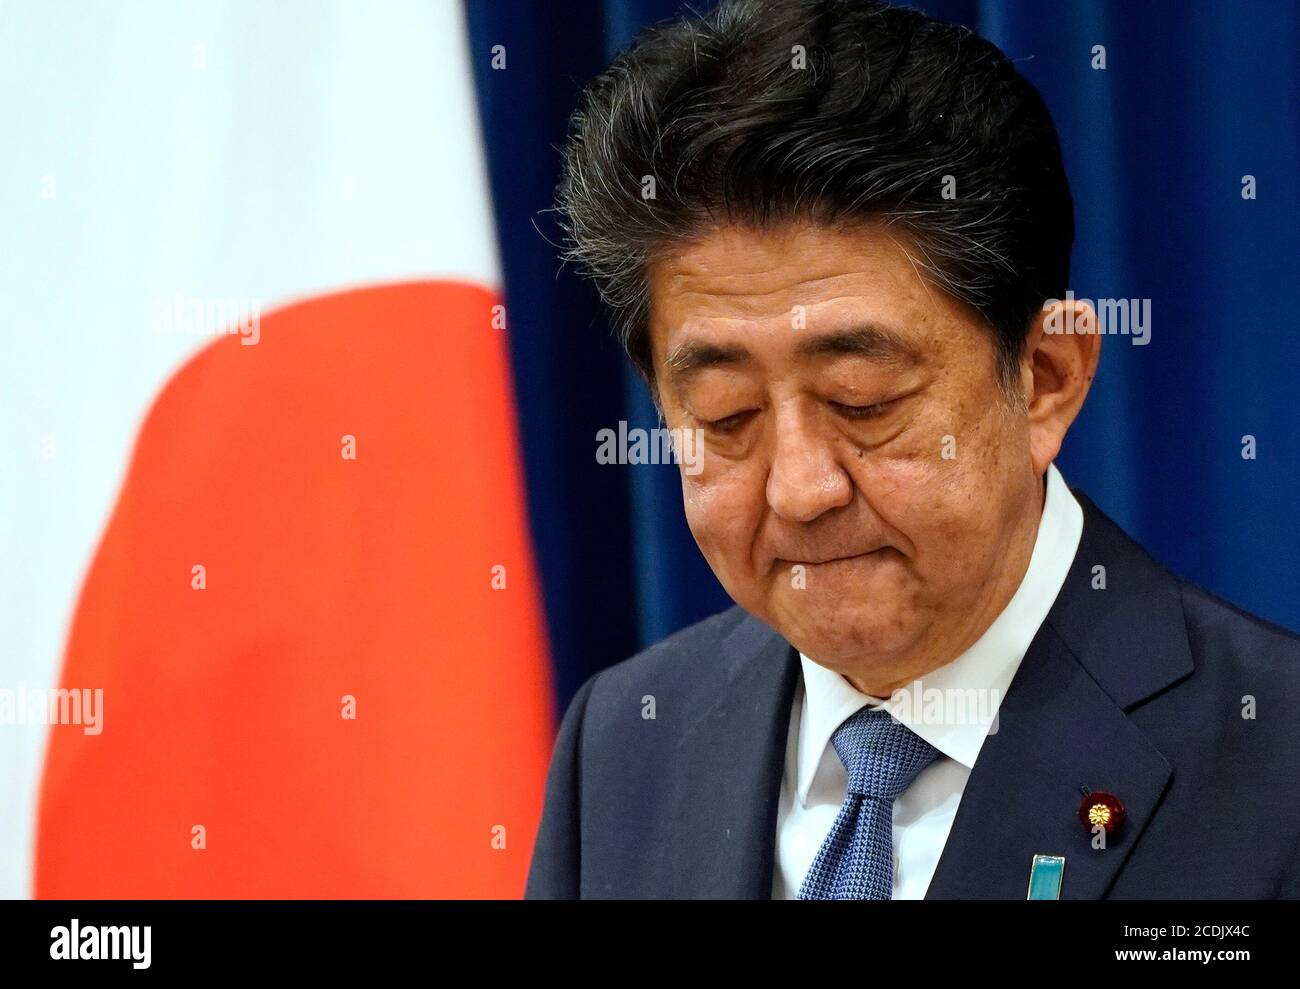 Tokyo, Japan. 28th Aug, 2020. Japanese Prime Minister Shinzo Abe reacts during a press conference at the prime minister official residence in Tokyo, Japan, 28 August 2020. Prime Minister Shinzo Abe announced his resignation due to health concerns. Credit: POOL/ZUMA Wire/Alamy Live News Stock Photo